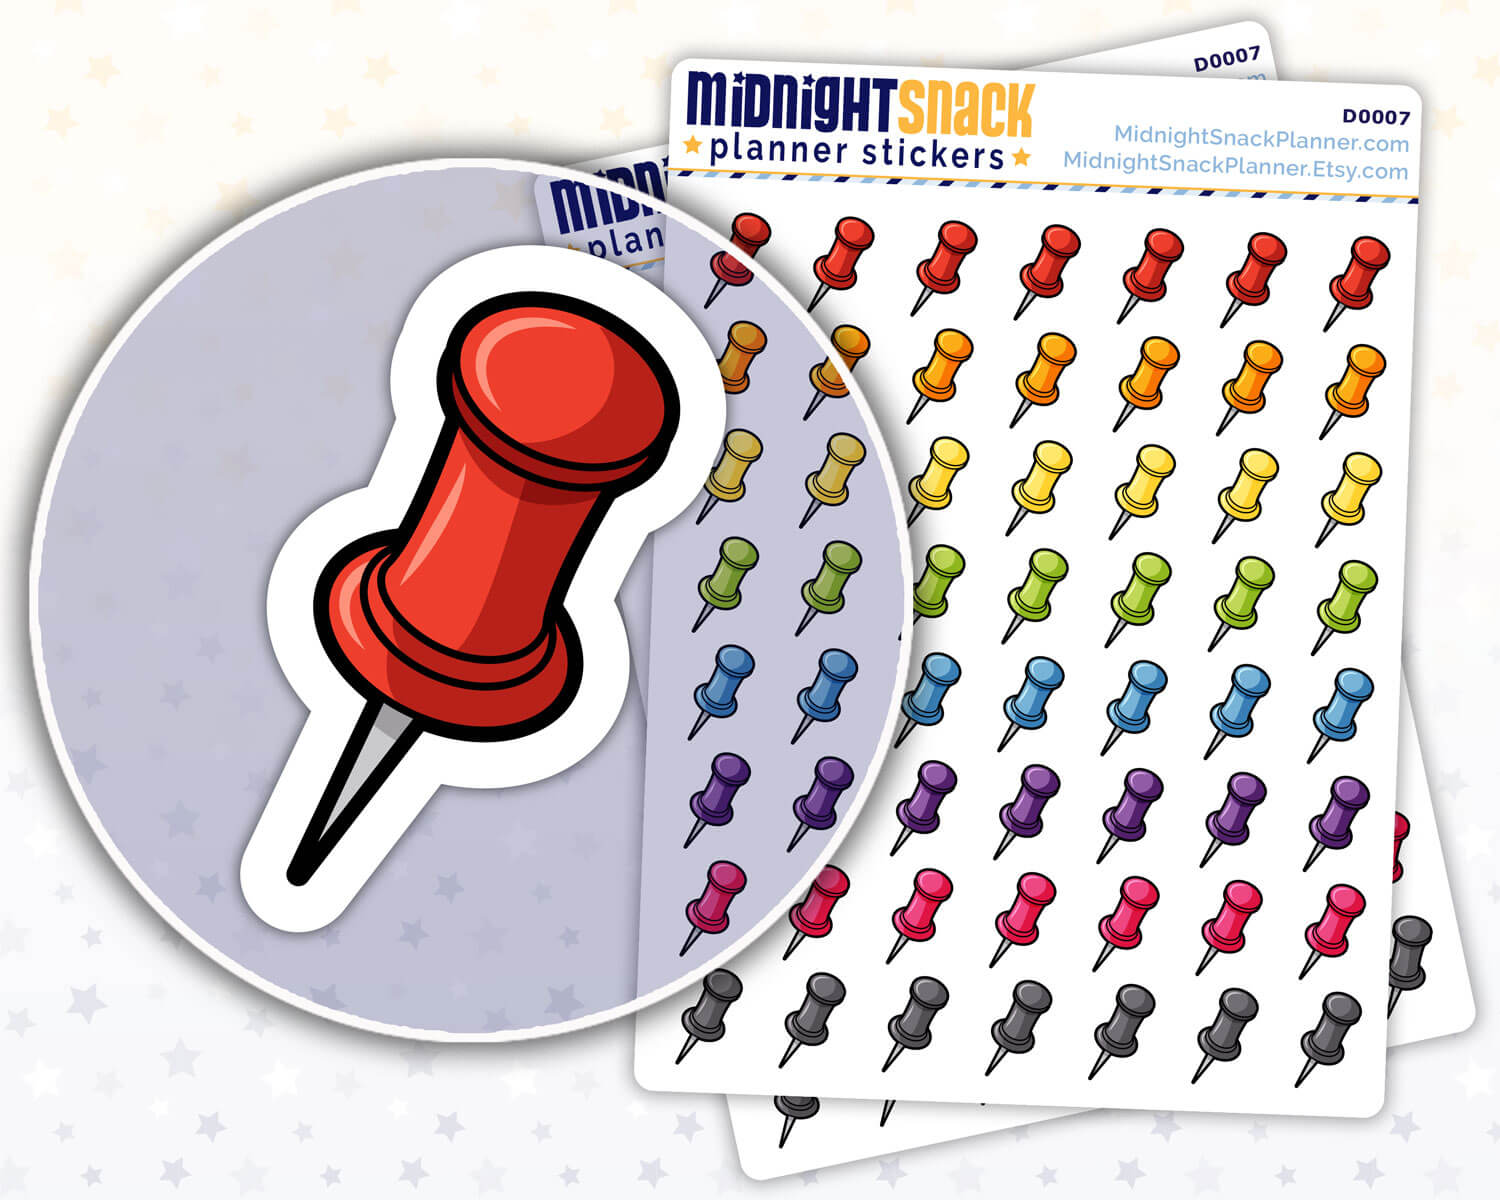 Push Pin Planner Stickers from Midnight Snack Planner